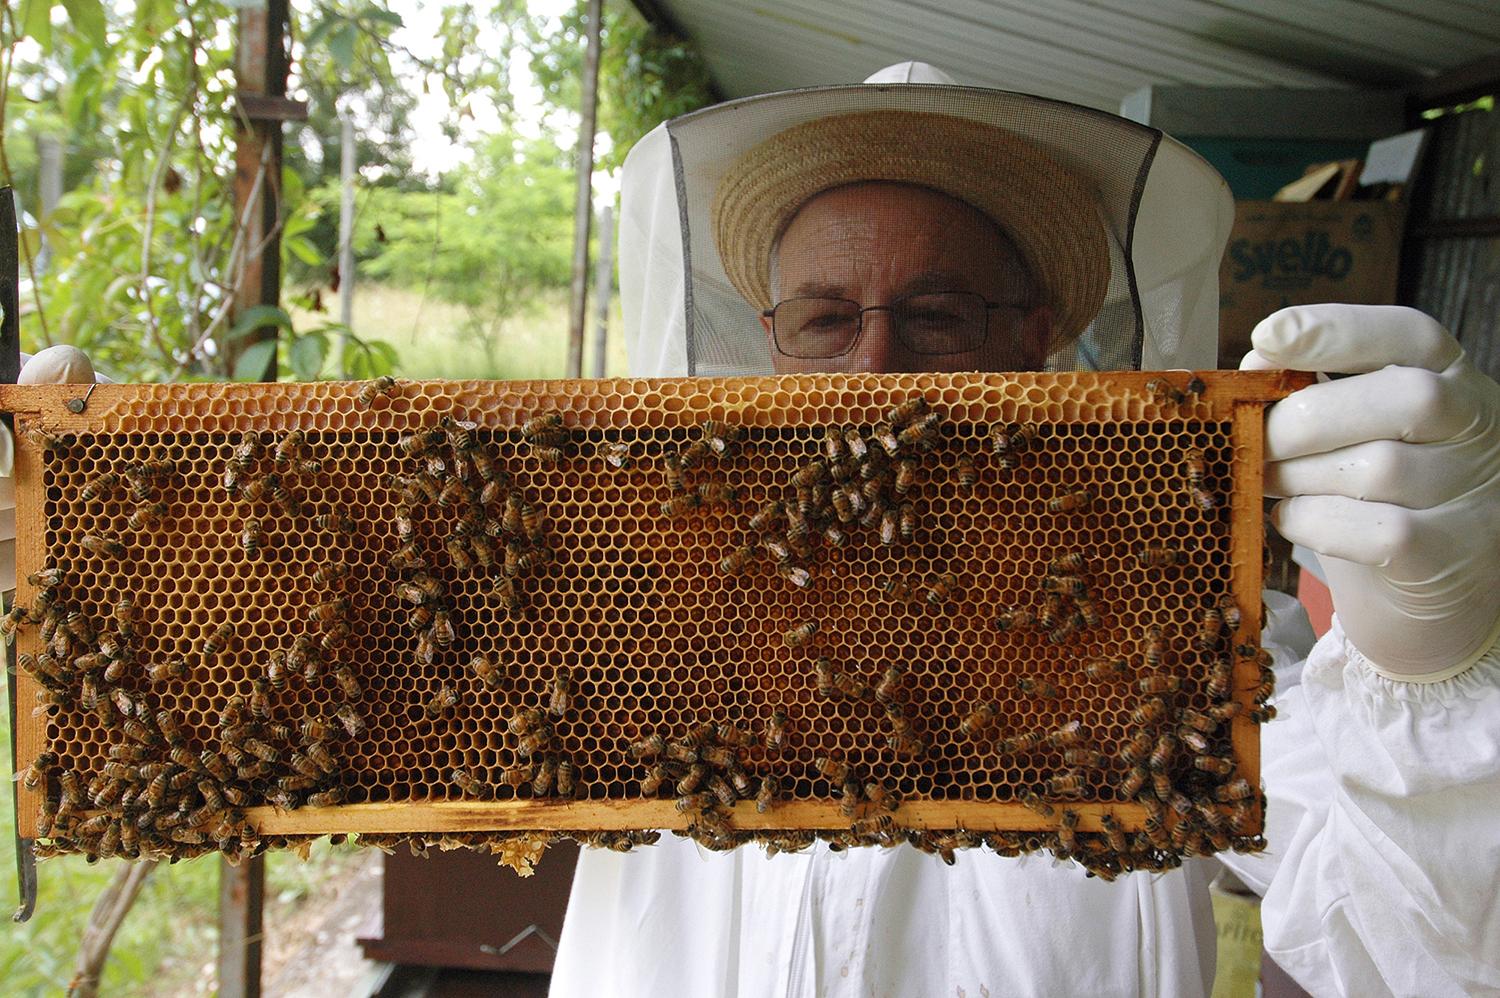 A beekeeper from Apicoltura Avianese Honey Farm in Italy checks for the queen bee on a honeycomb frame. (U.S. Air Force photo / Senior Airman Justin Weaver)